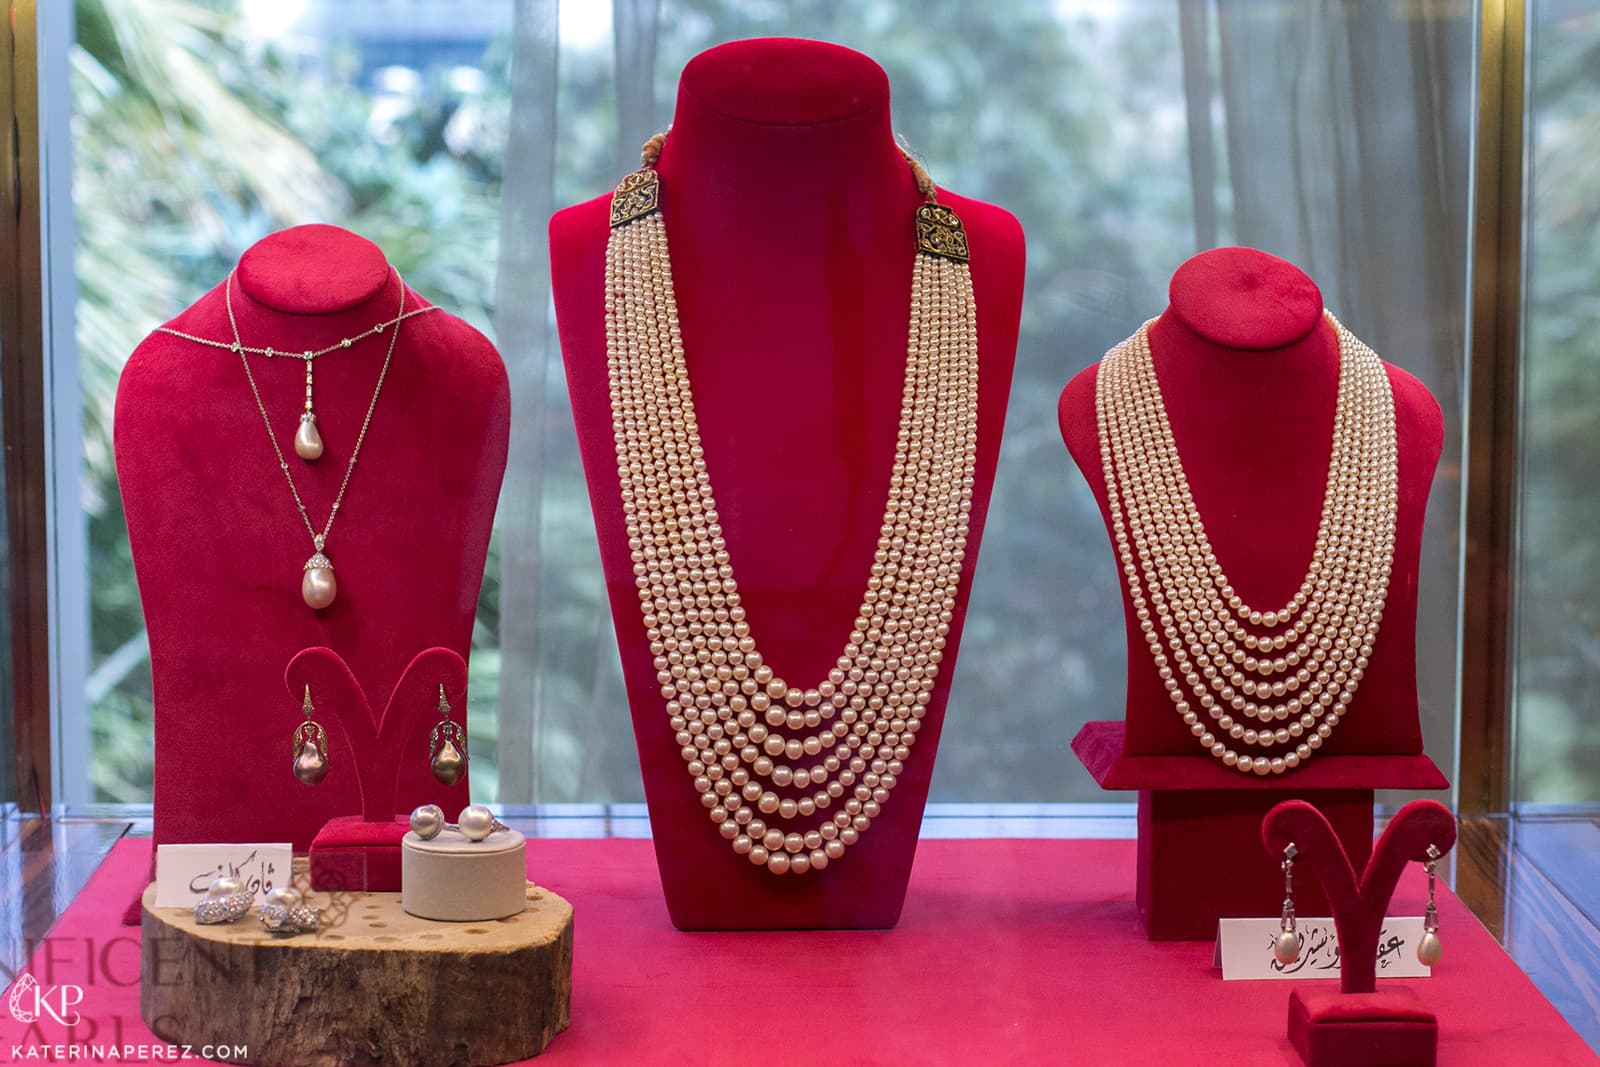 Christie's Magnificent Pearls exhibition showcase with the Rajasthani pearl strings in the middle